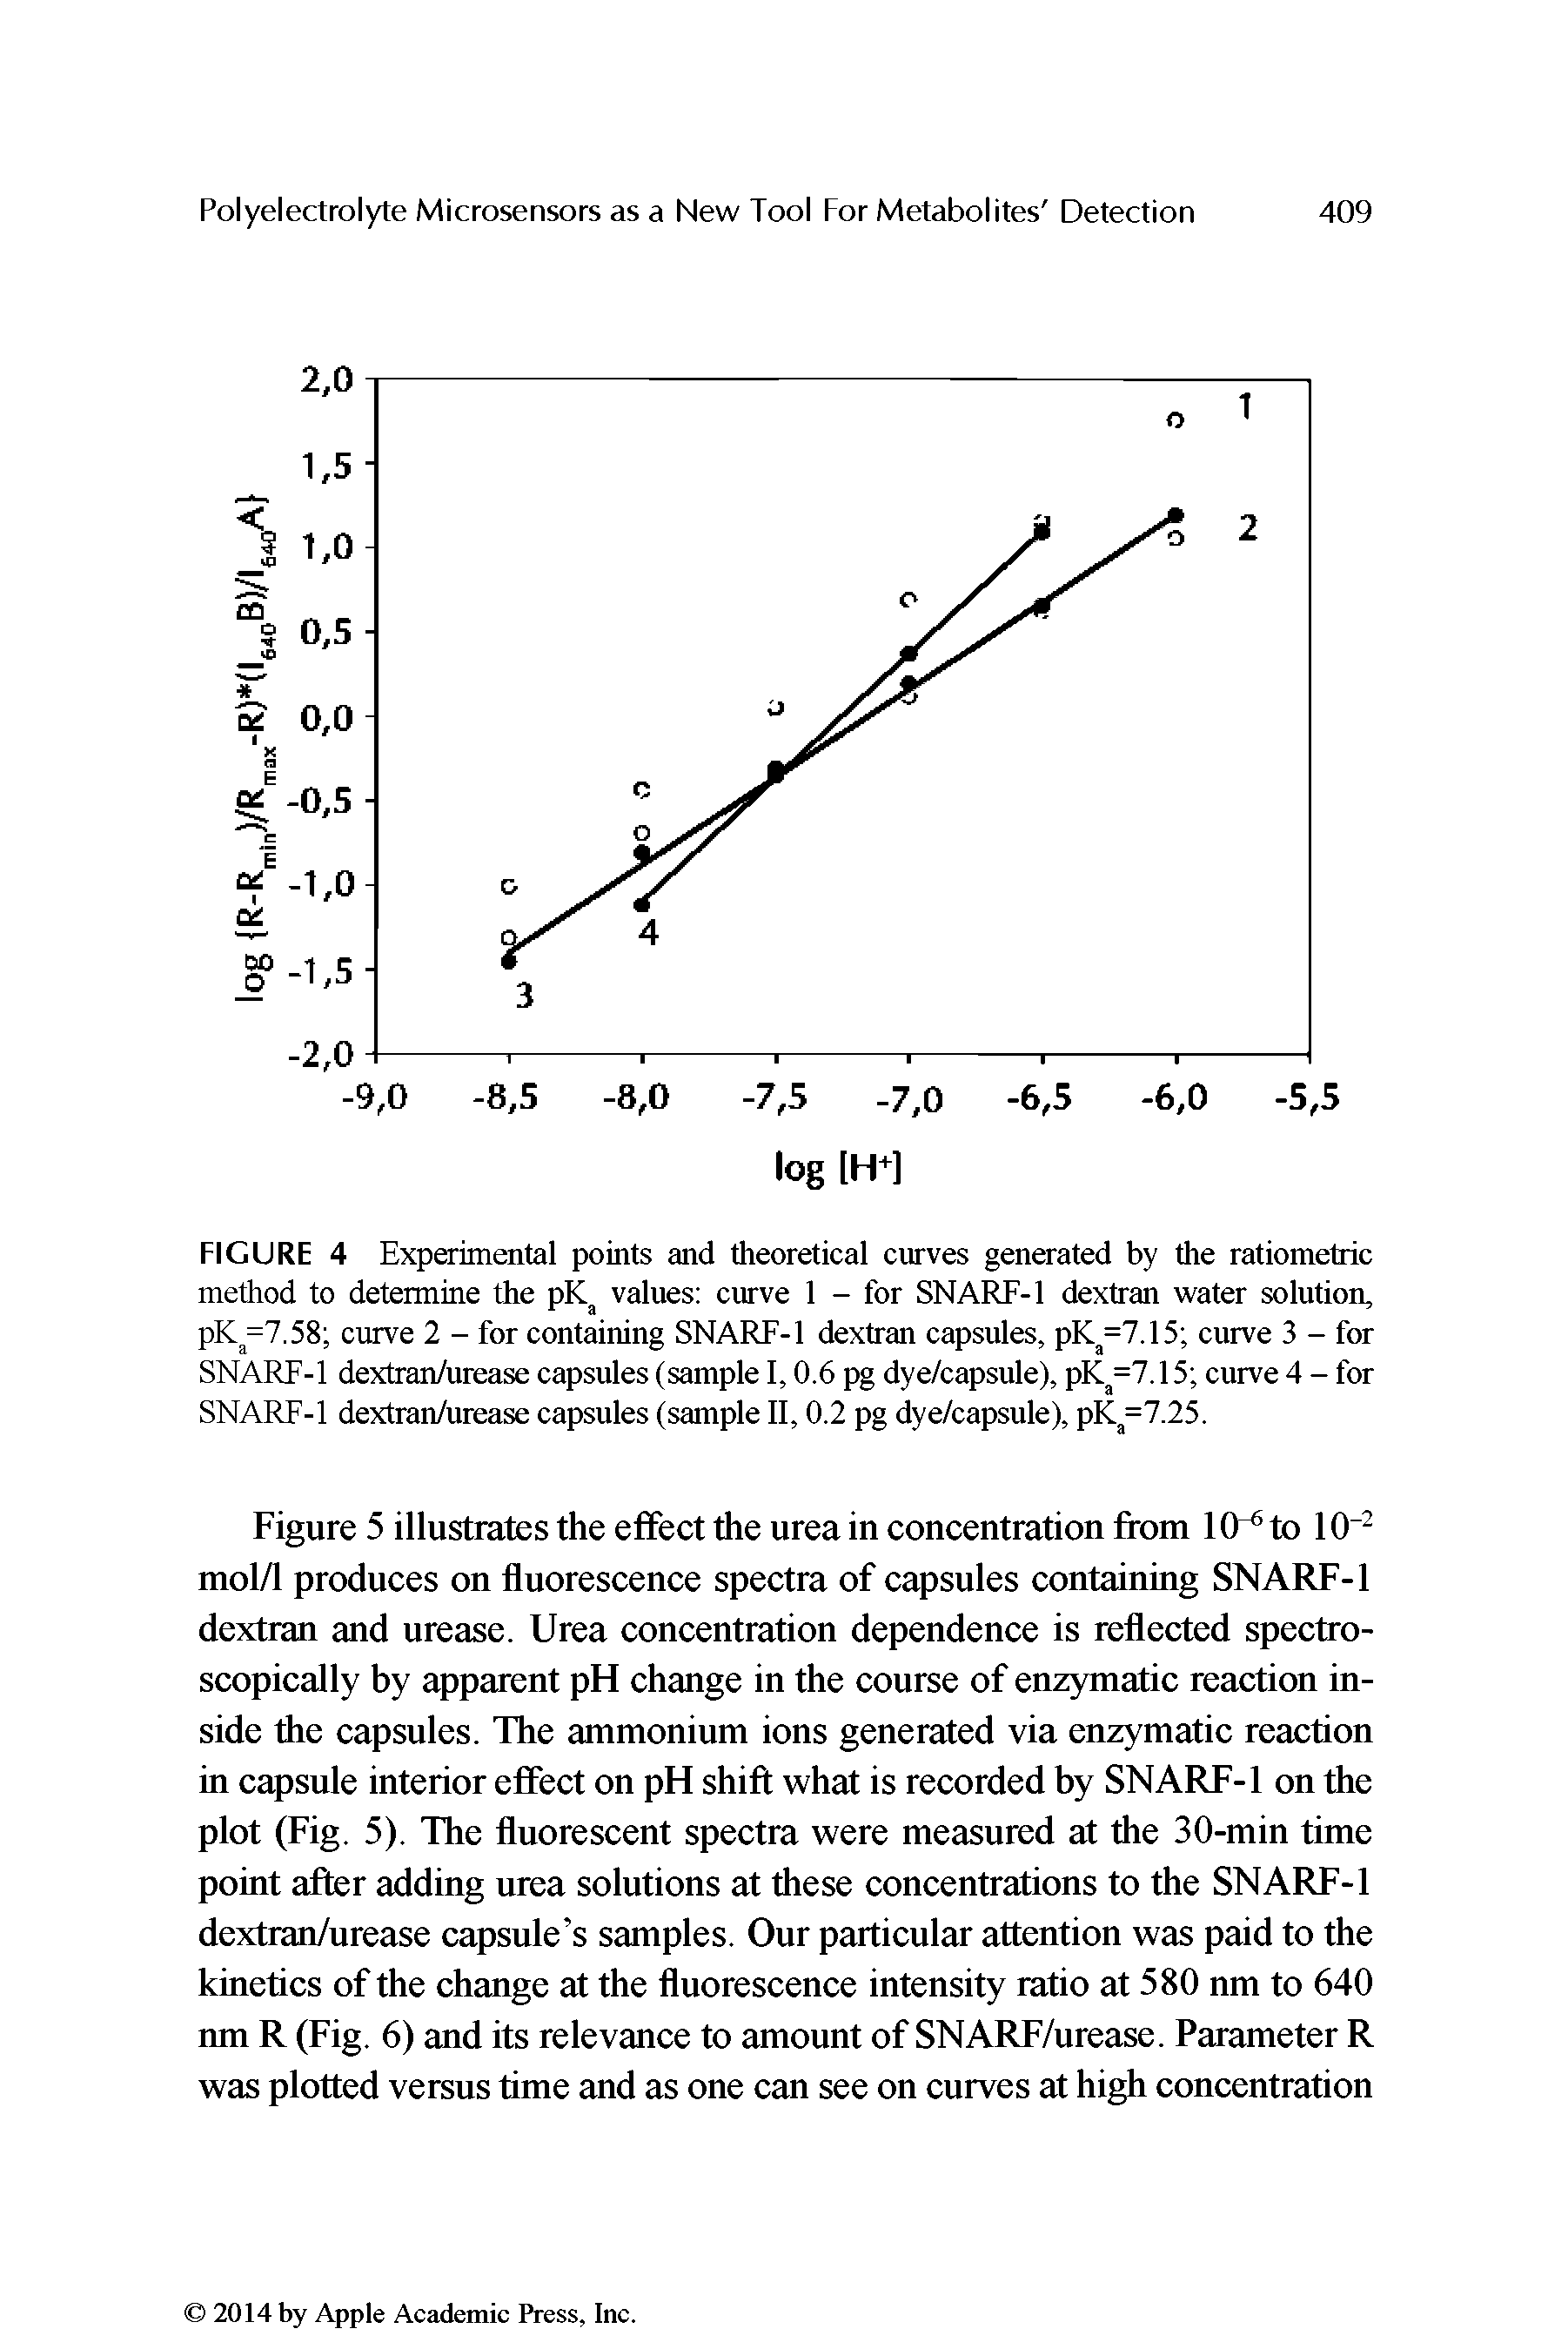 Figure 5 illustrates the effect the urea in concentration from 10 to 10 mol/1 produces on fluorescence spectra of capsules containing SNARF-1 dextran and urease. Urea concentration dependence is reflected spectroscopically by apparent pH change in the course of enzymiatic reaction inside the capsules. The ammonium ions generated via enzymatic reaction in capsule interior effect on pH shift what is recorded by SNARF-1 on the plot (Fig. 5). The fluorescent spectra were measured at the 30-min time point after adding urea solutions at these concentrations to the SNARF-1 dextran/urease capsule s samples. Our particular attention was paid to the kinetics of the change at the fluorescence intensity ratio at 580 nm to 640 nm R (Fig. 6) and its relevance to amount of SNARF/urease. Parameter R was plotted versus time and as one can see on curves at high concentration...